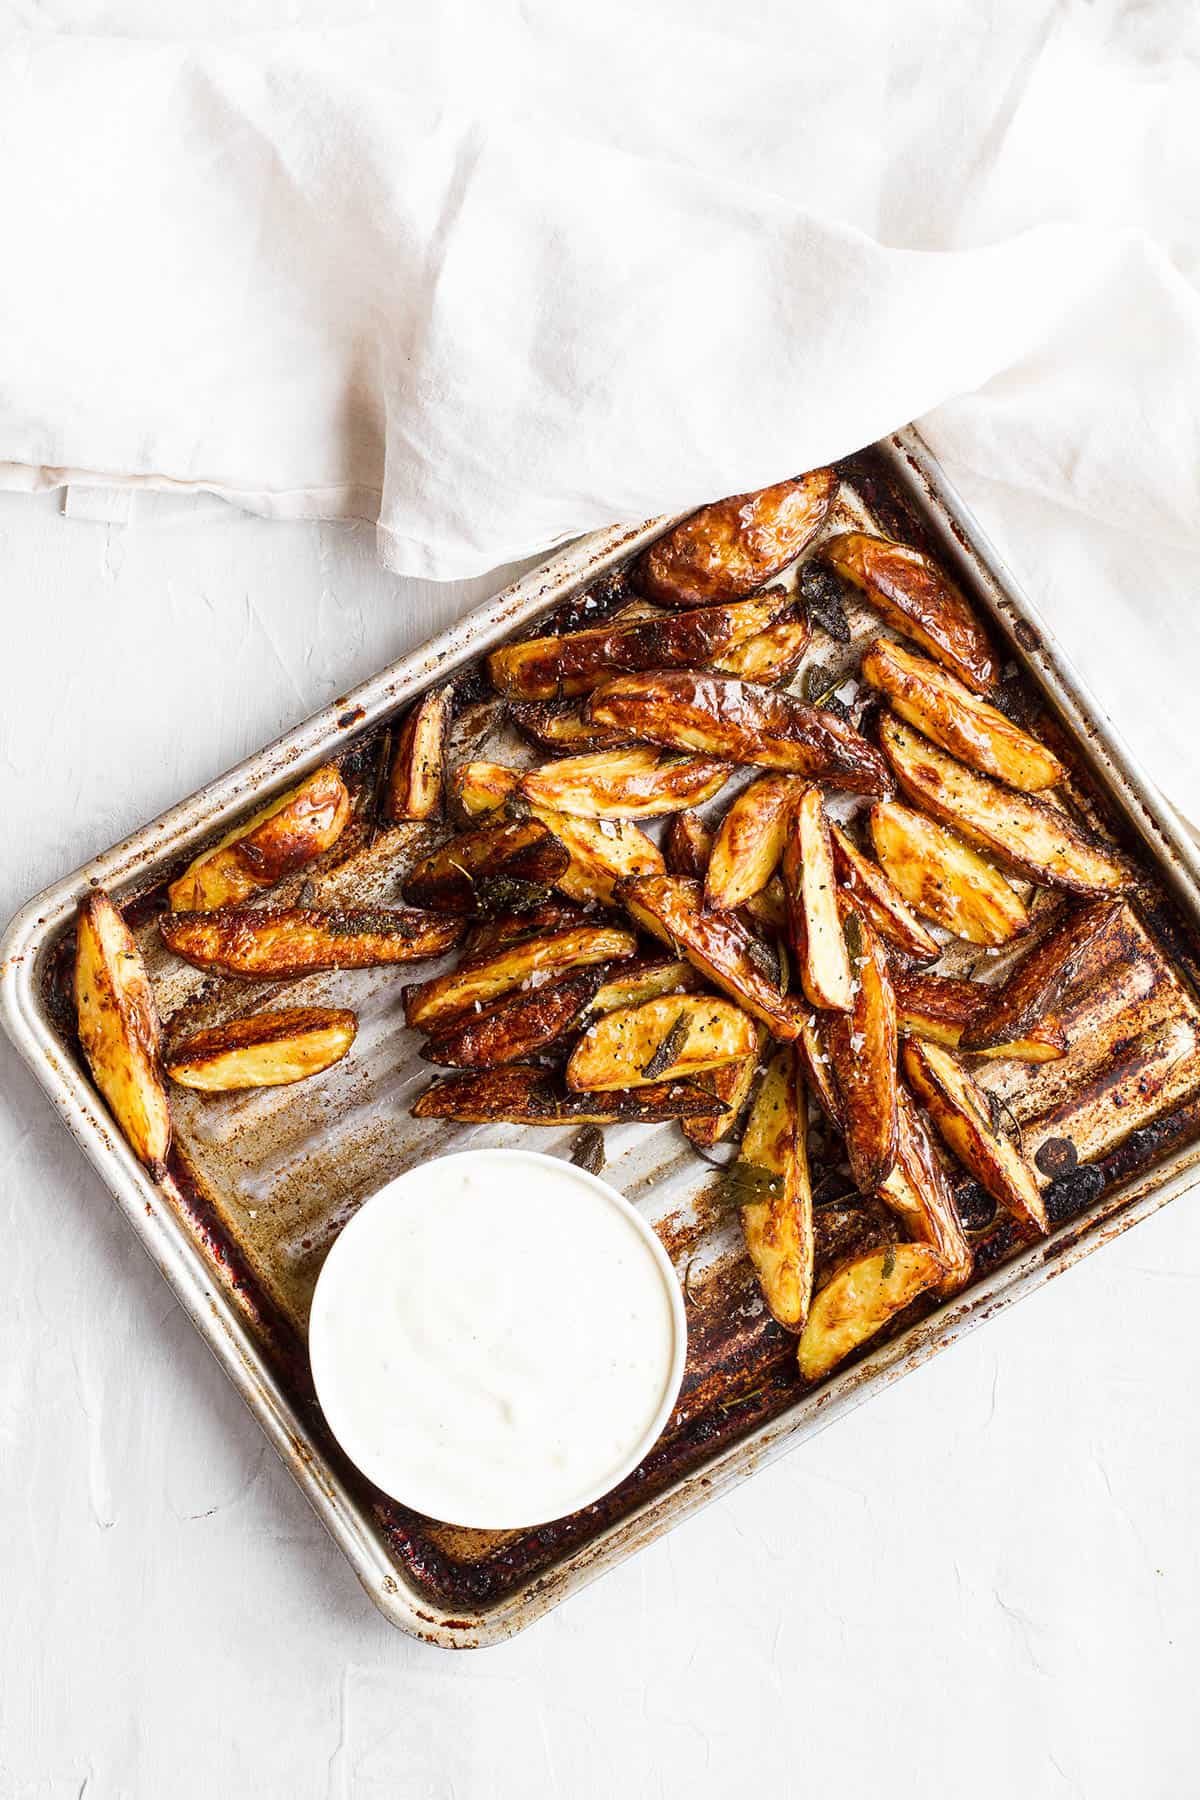 An old baking tray with baked potato wedges, seen from above.